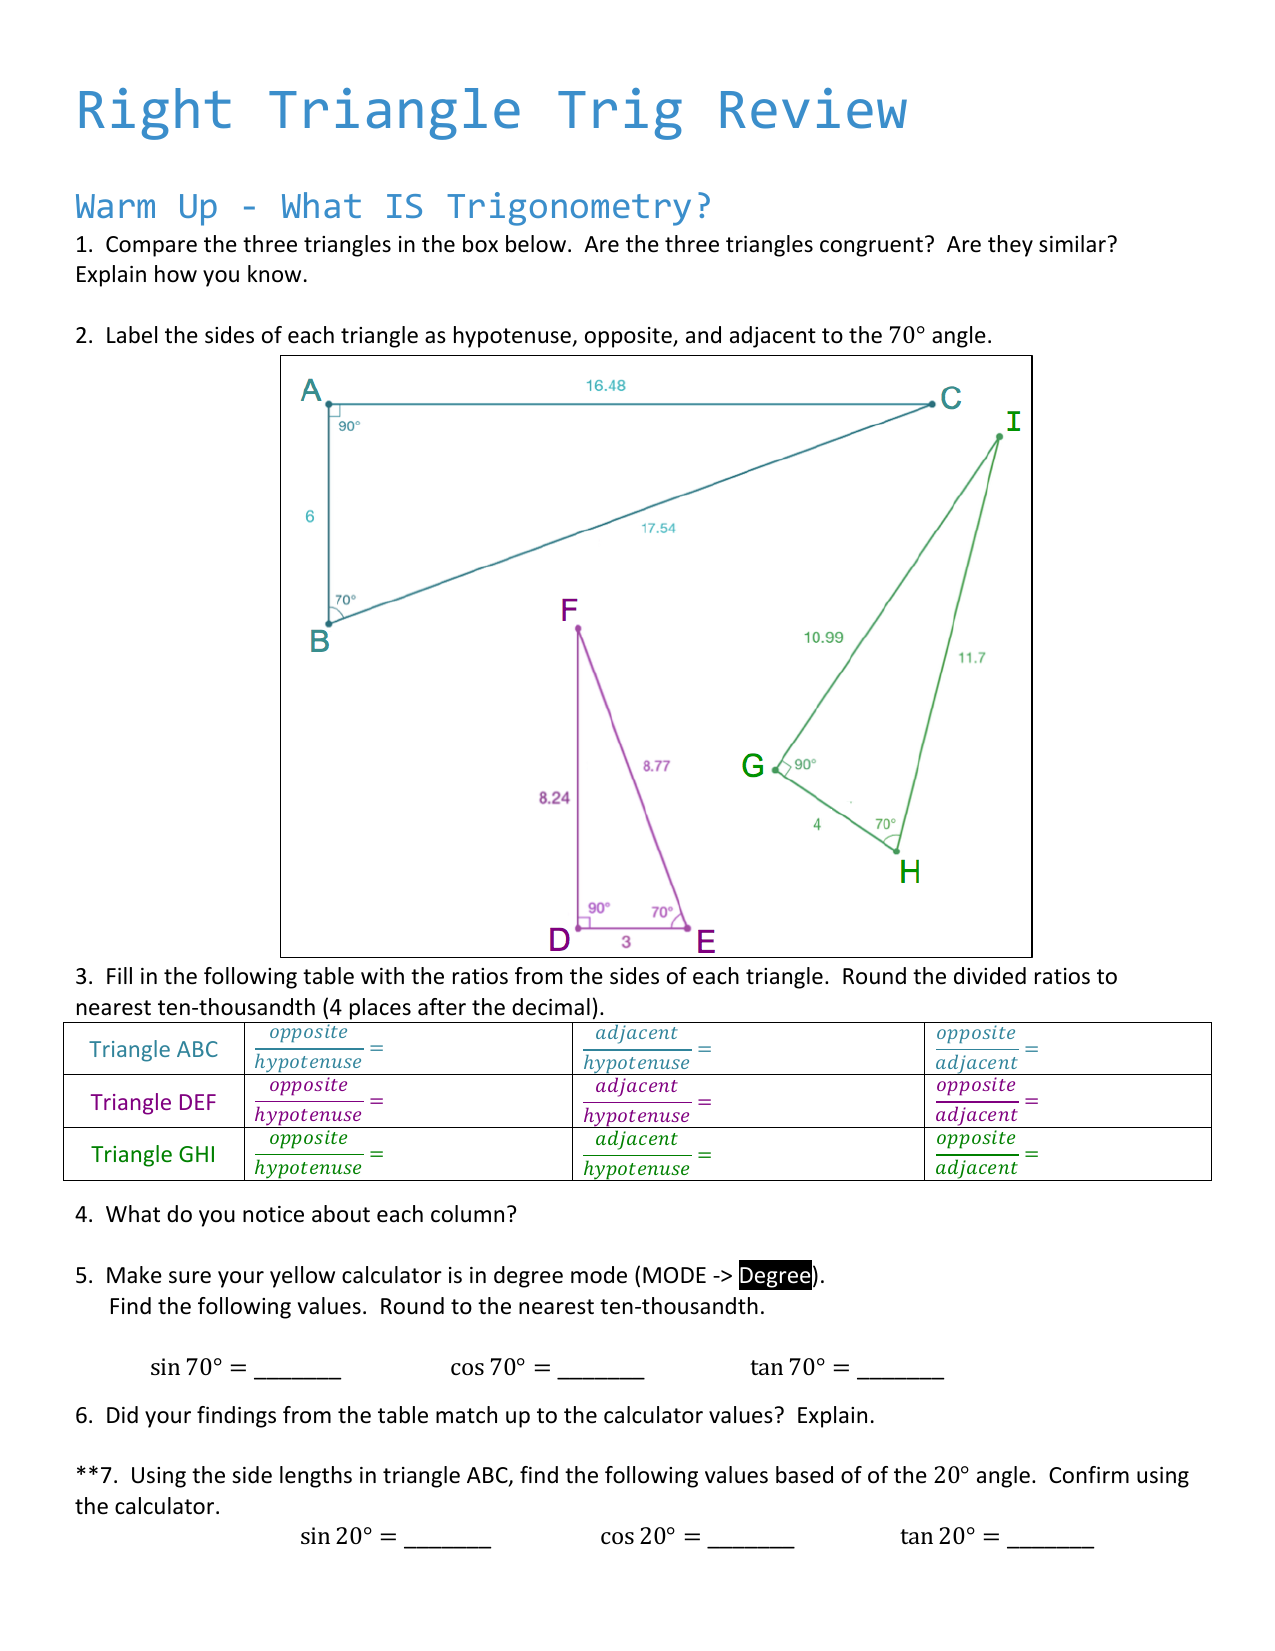 trigonometry worksheet 20.20 chapter 20 answers Regarding Right Triangle Trig Worksheet Answers